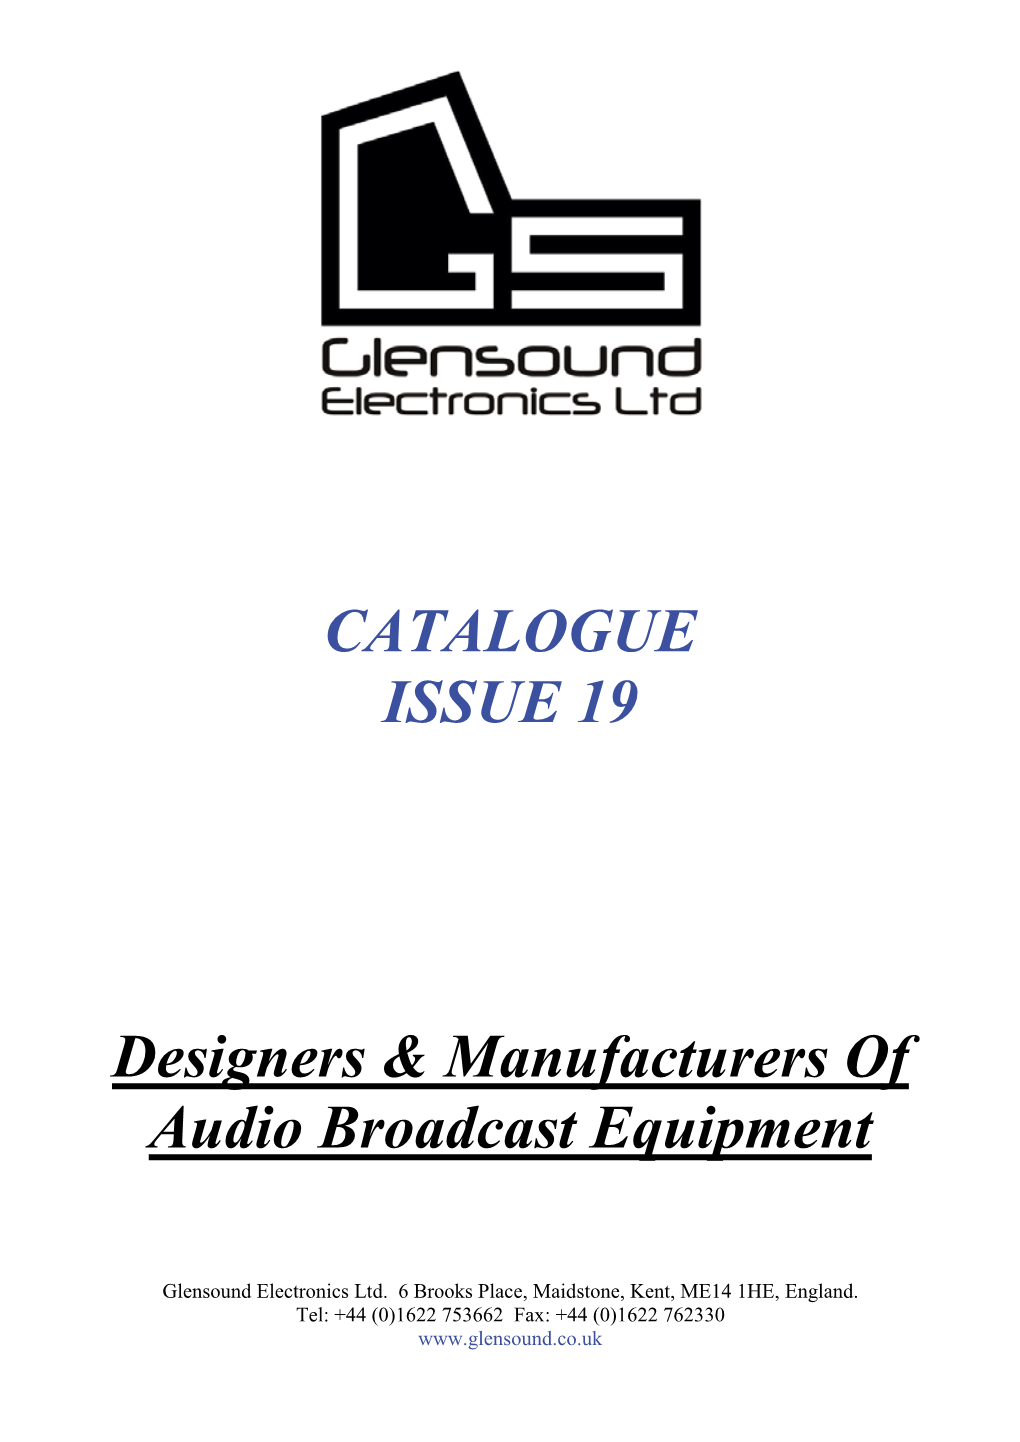 CATALOGUE ISSUE 19 Designers & Manufacturers of Audio Broadcast